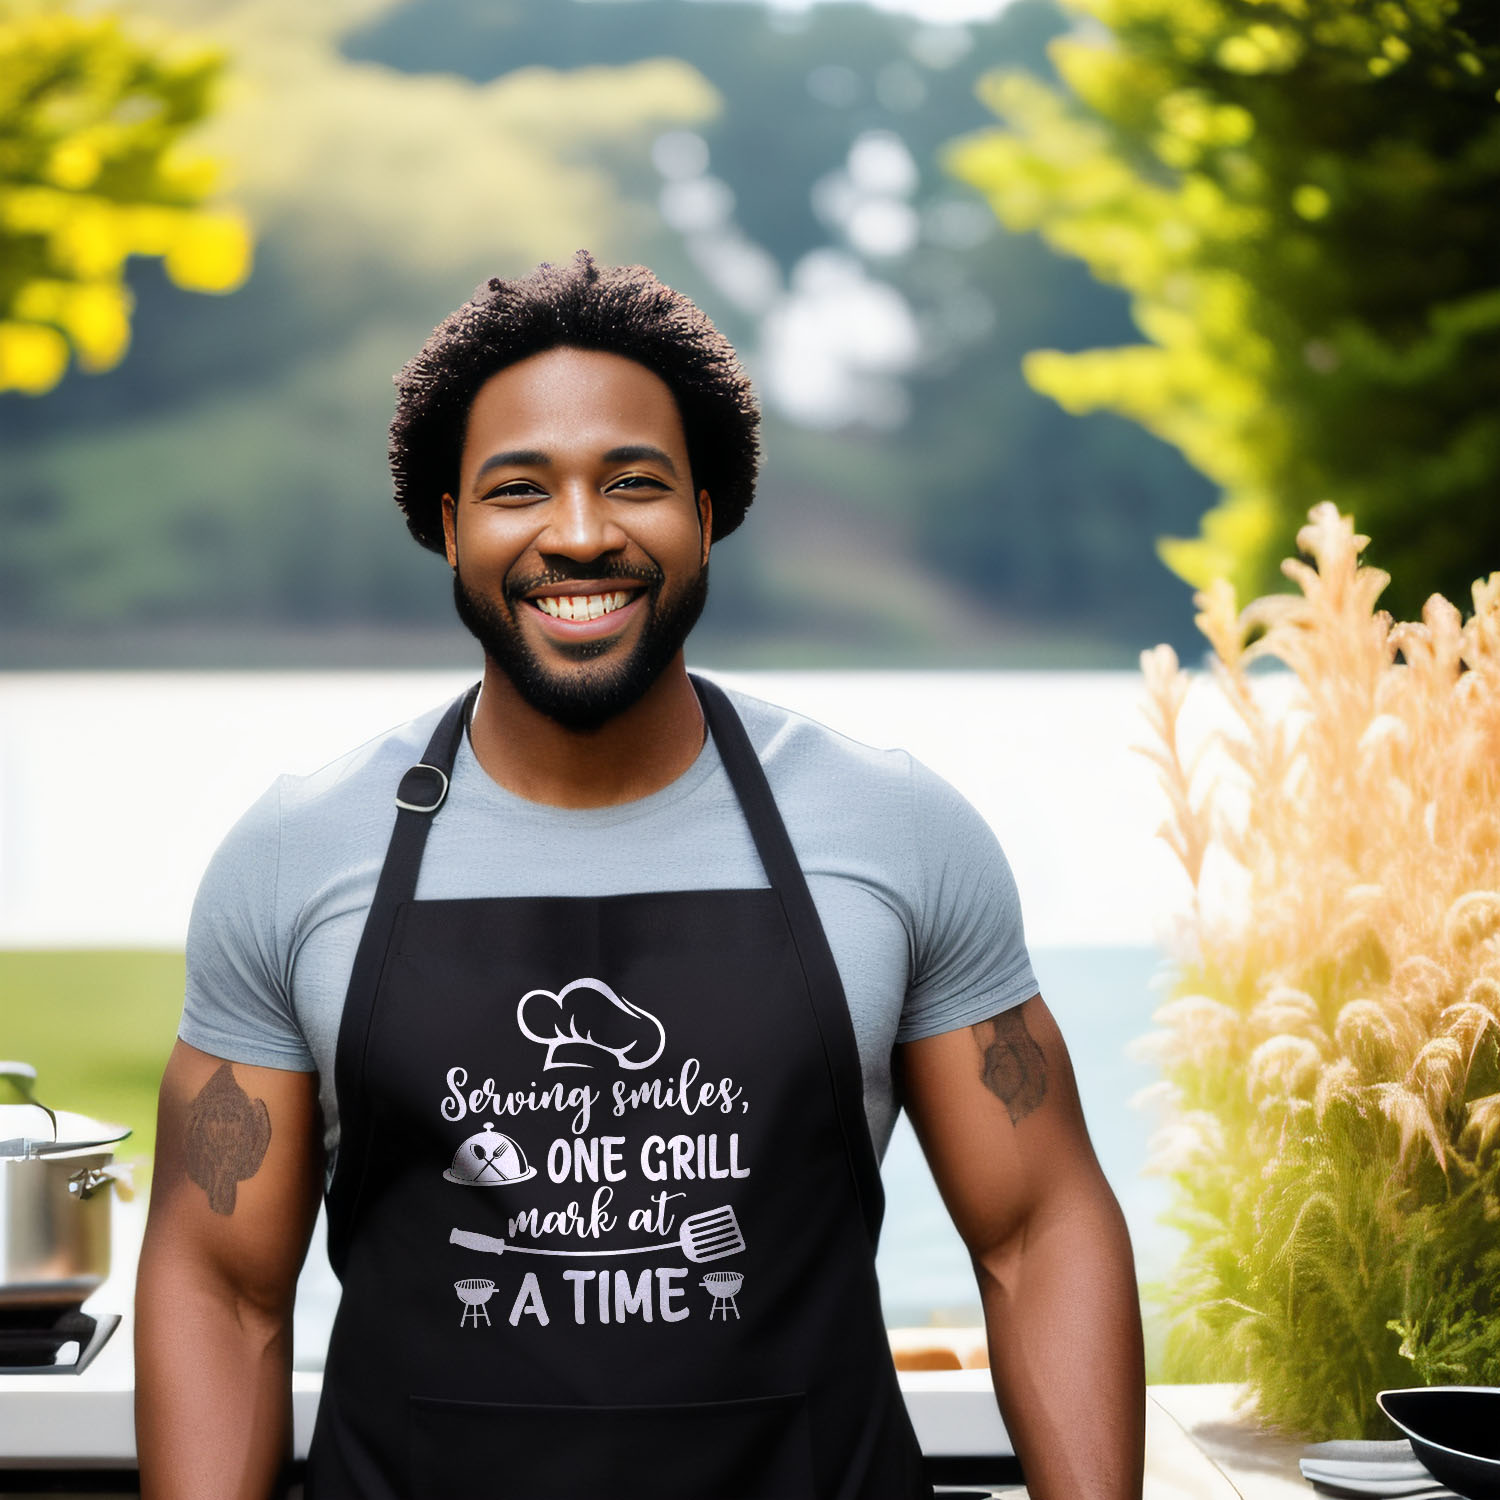 Serving smiles. one grill mark at a time - BBQ Apron